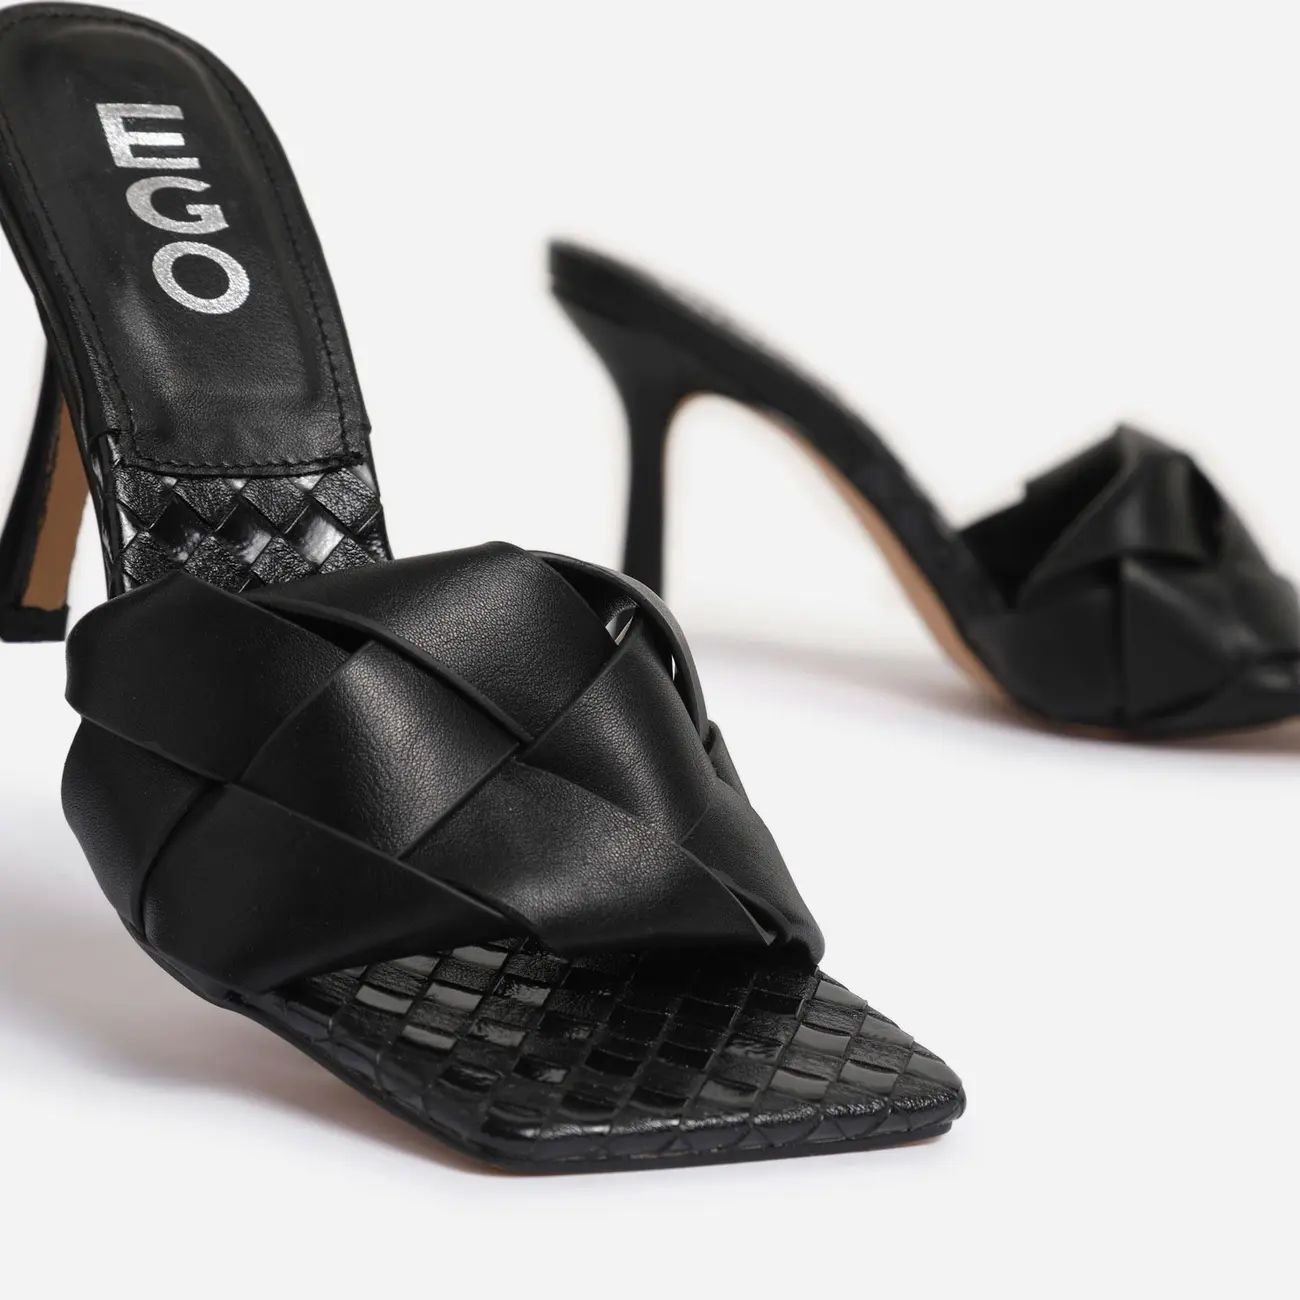 Turntup Woven Square Peep Toe Mule In Black Faux Leather | EGO Shoes (US & Canada)